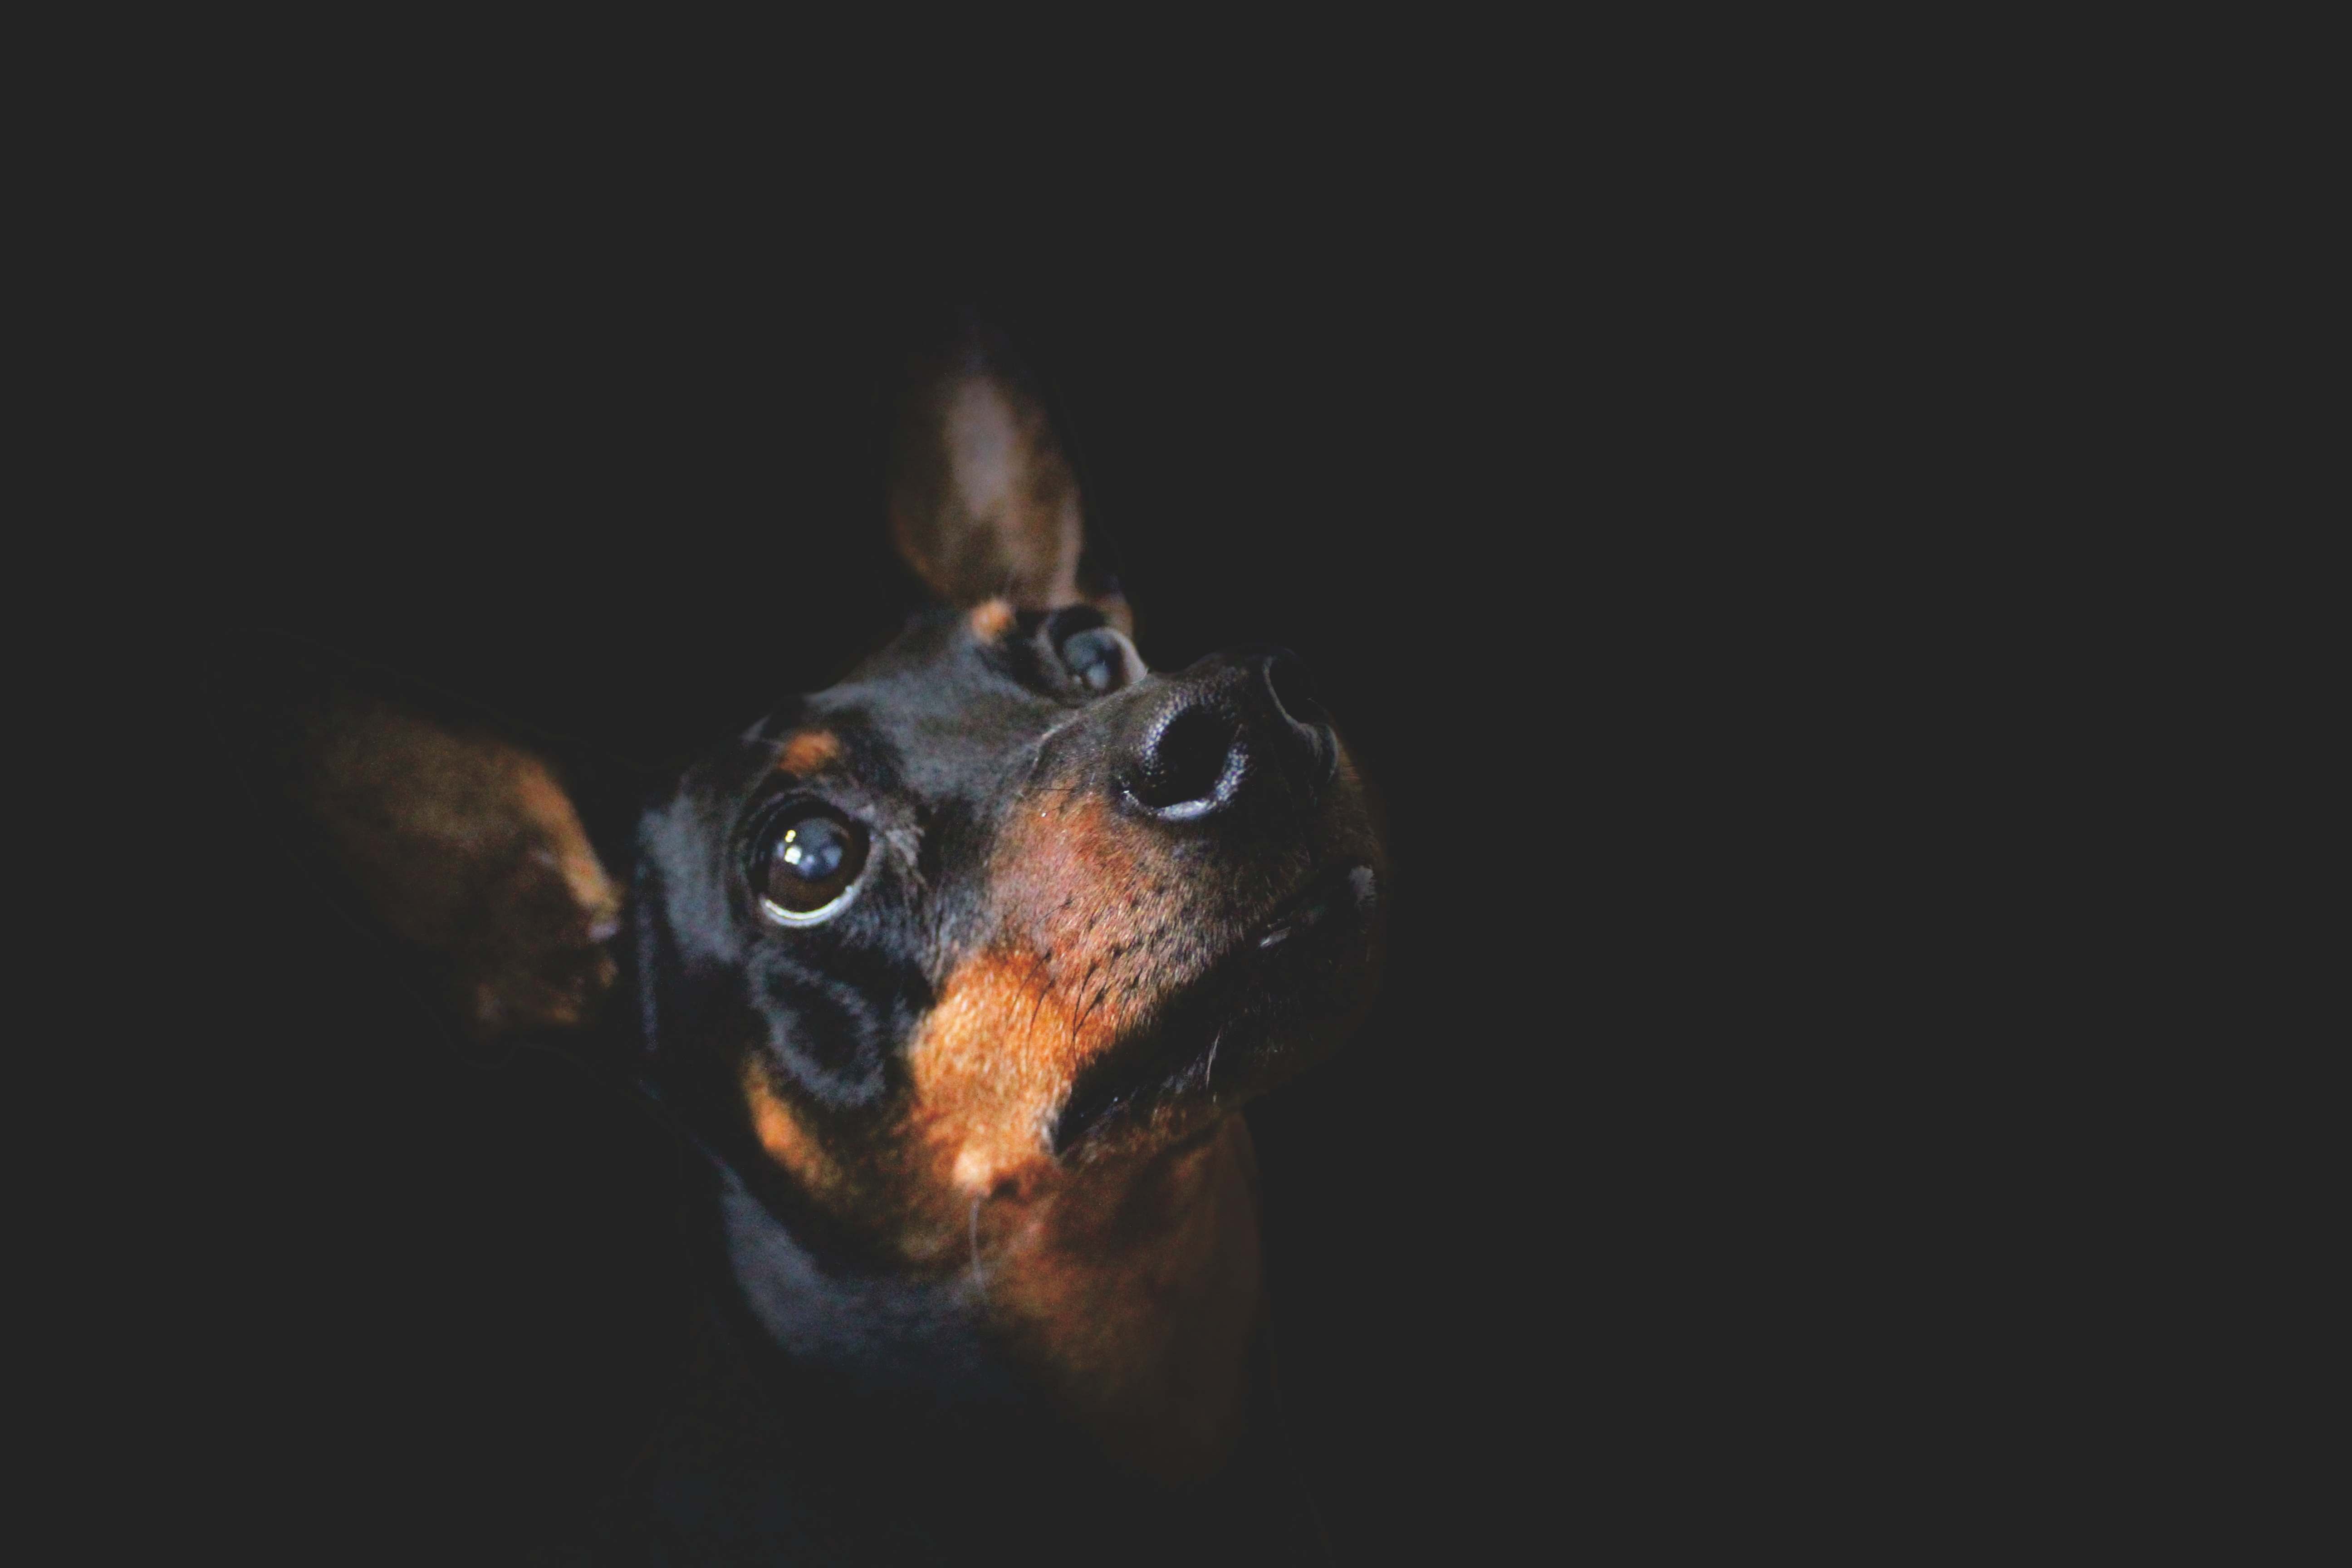 Dog in a dark free image download